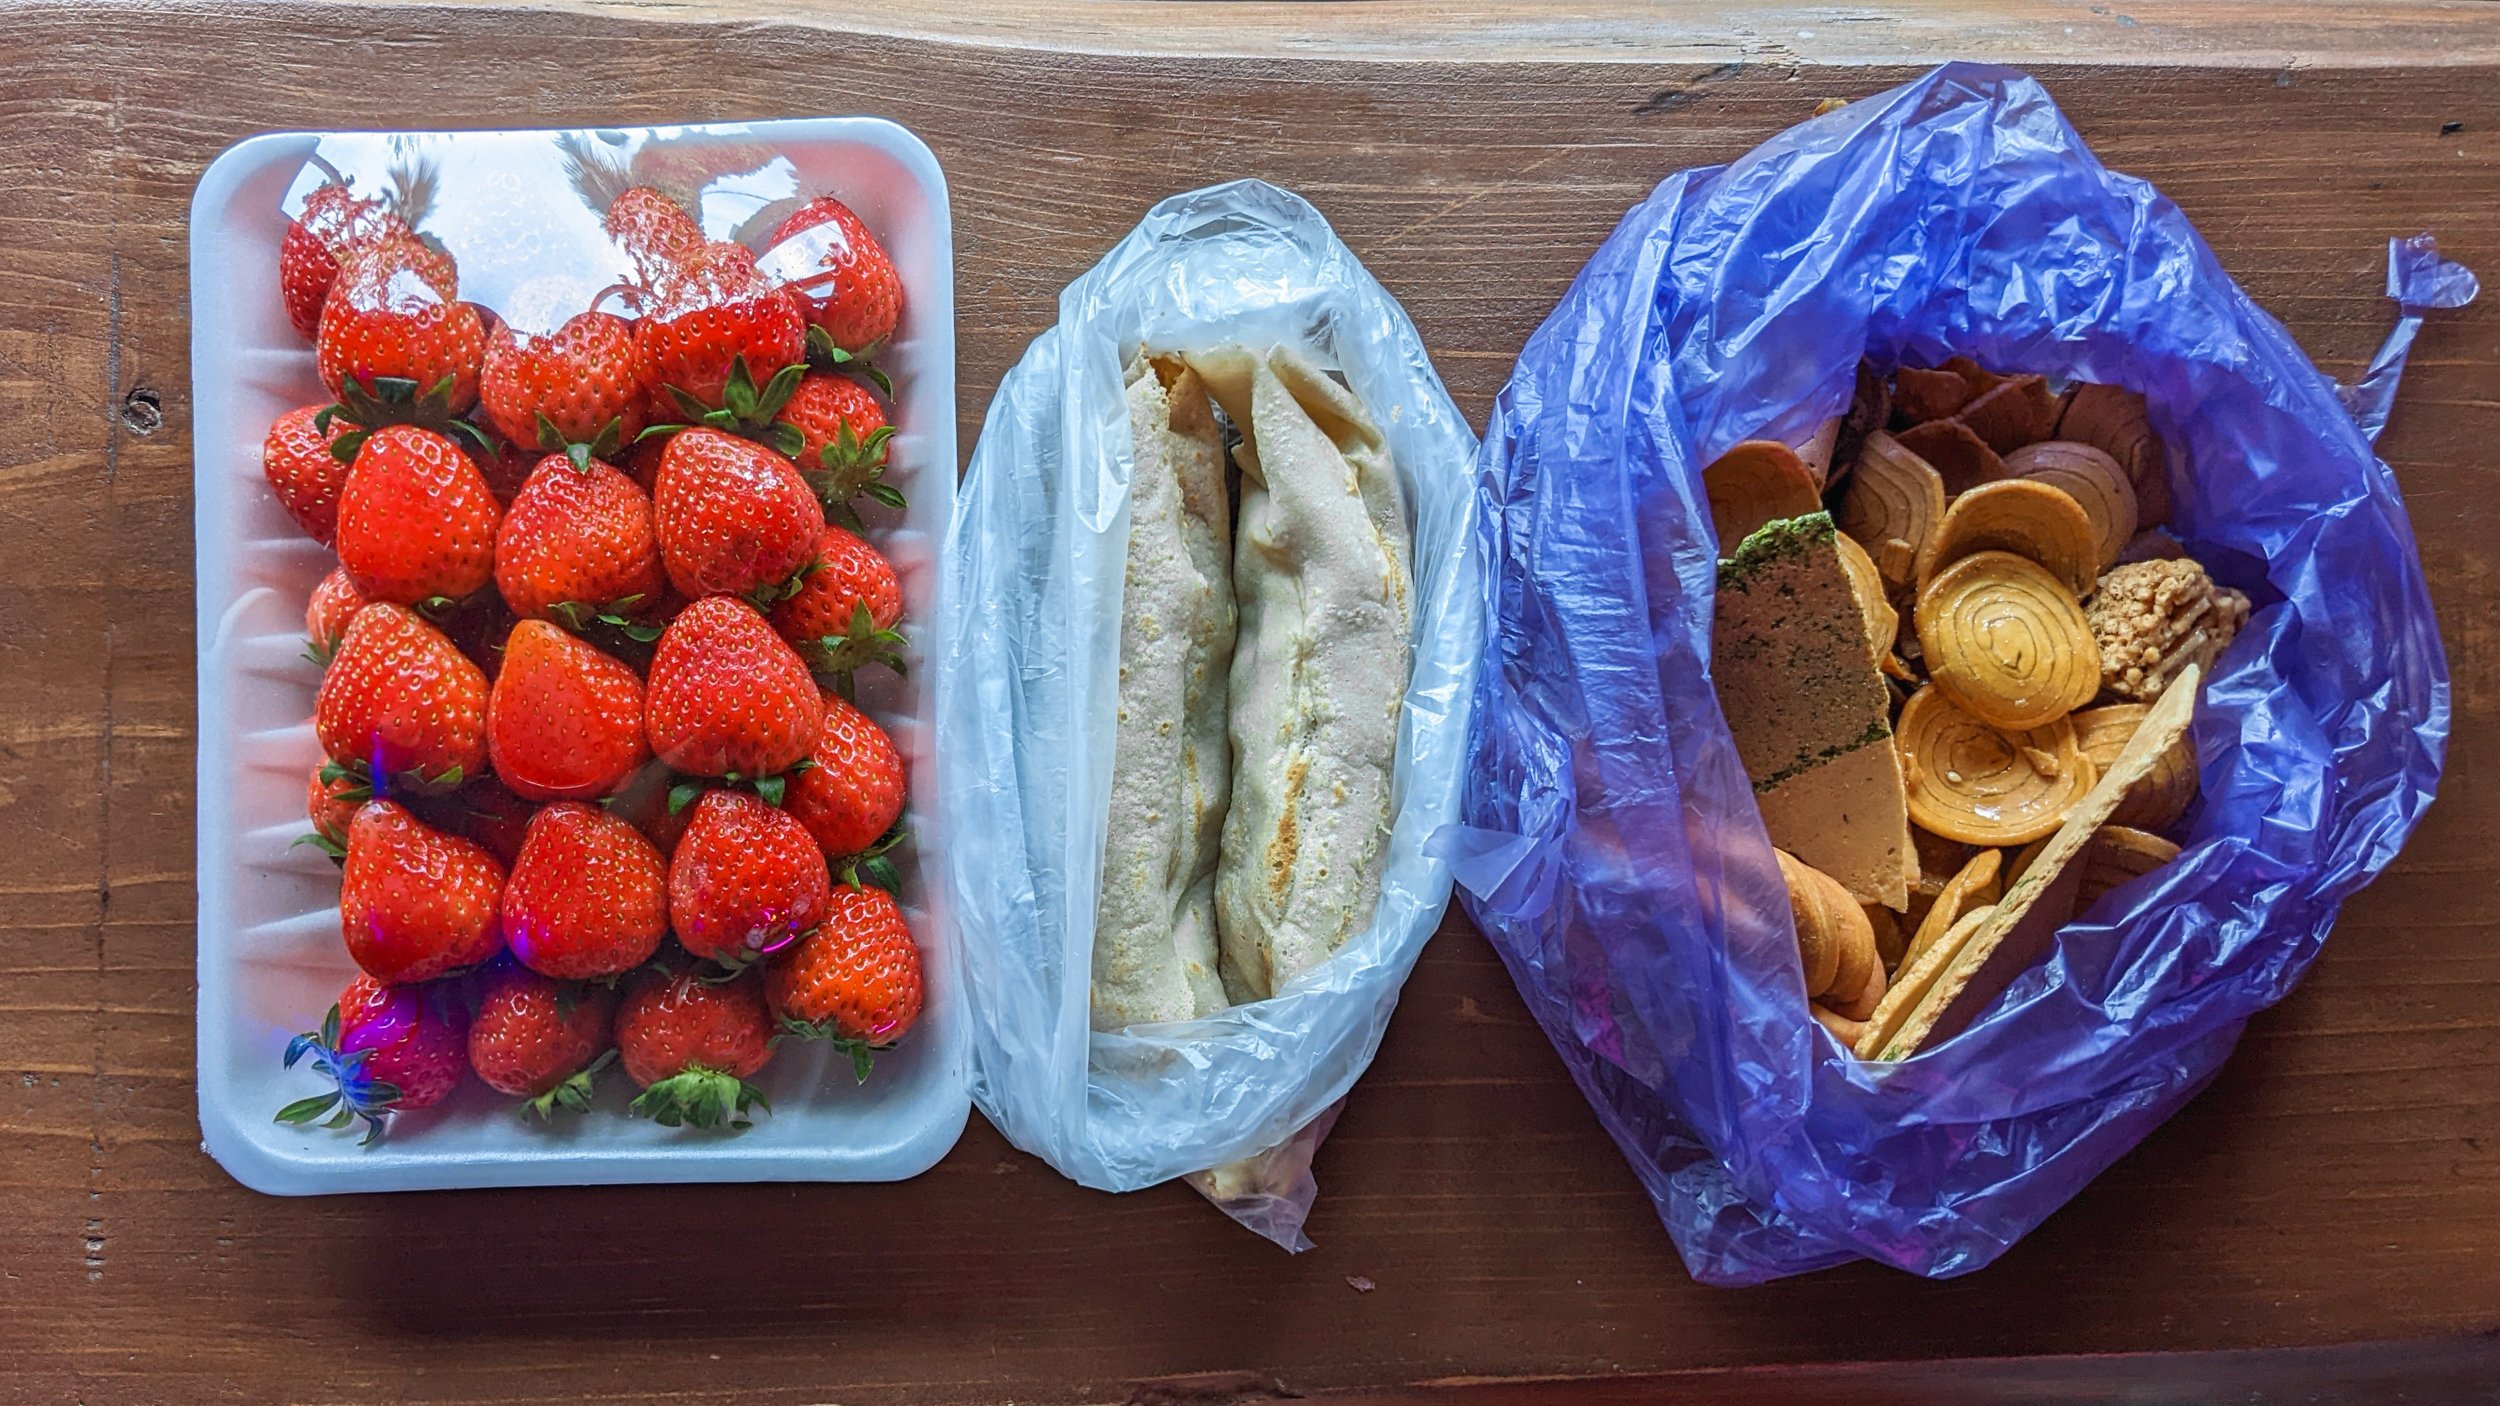  My spread from the market: strawberries, bingtteok, and a mixed bag of traditional Korean crackers 